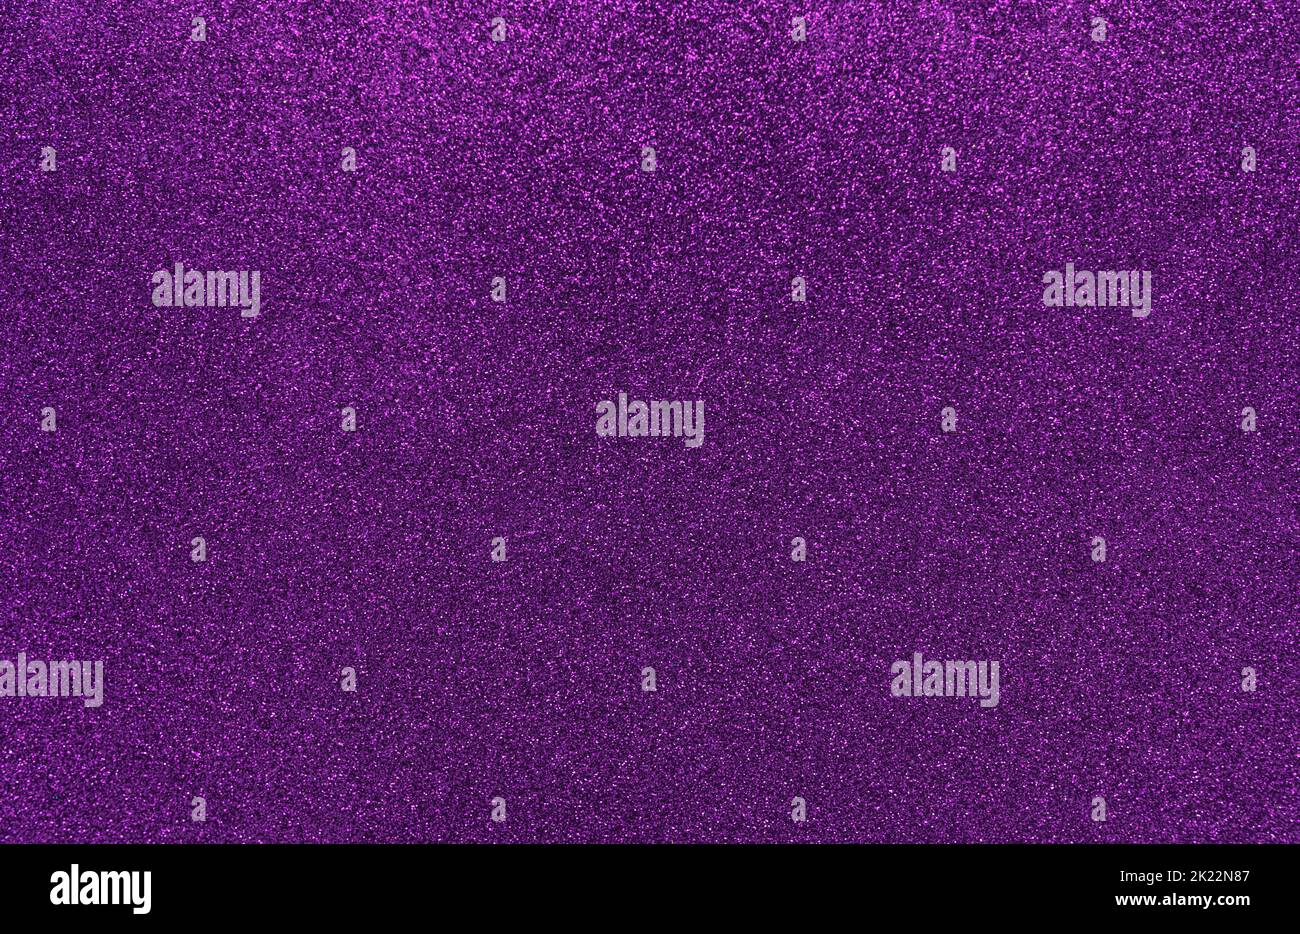 Festive background of small sparkles. Stock Photo